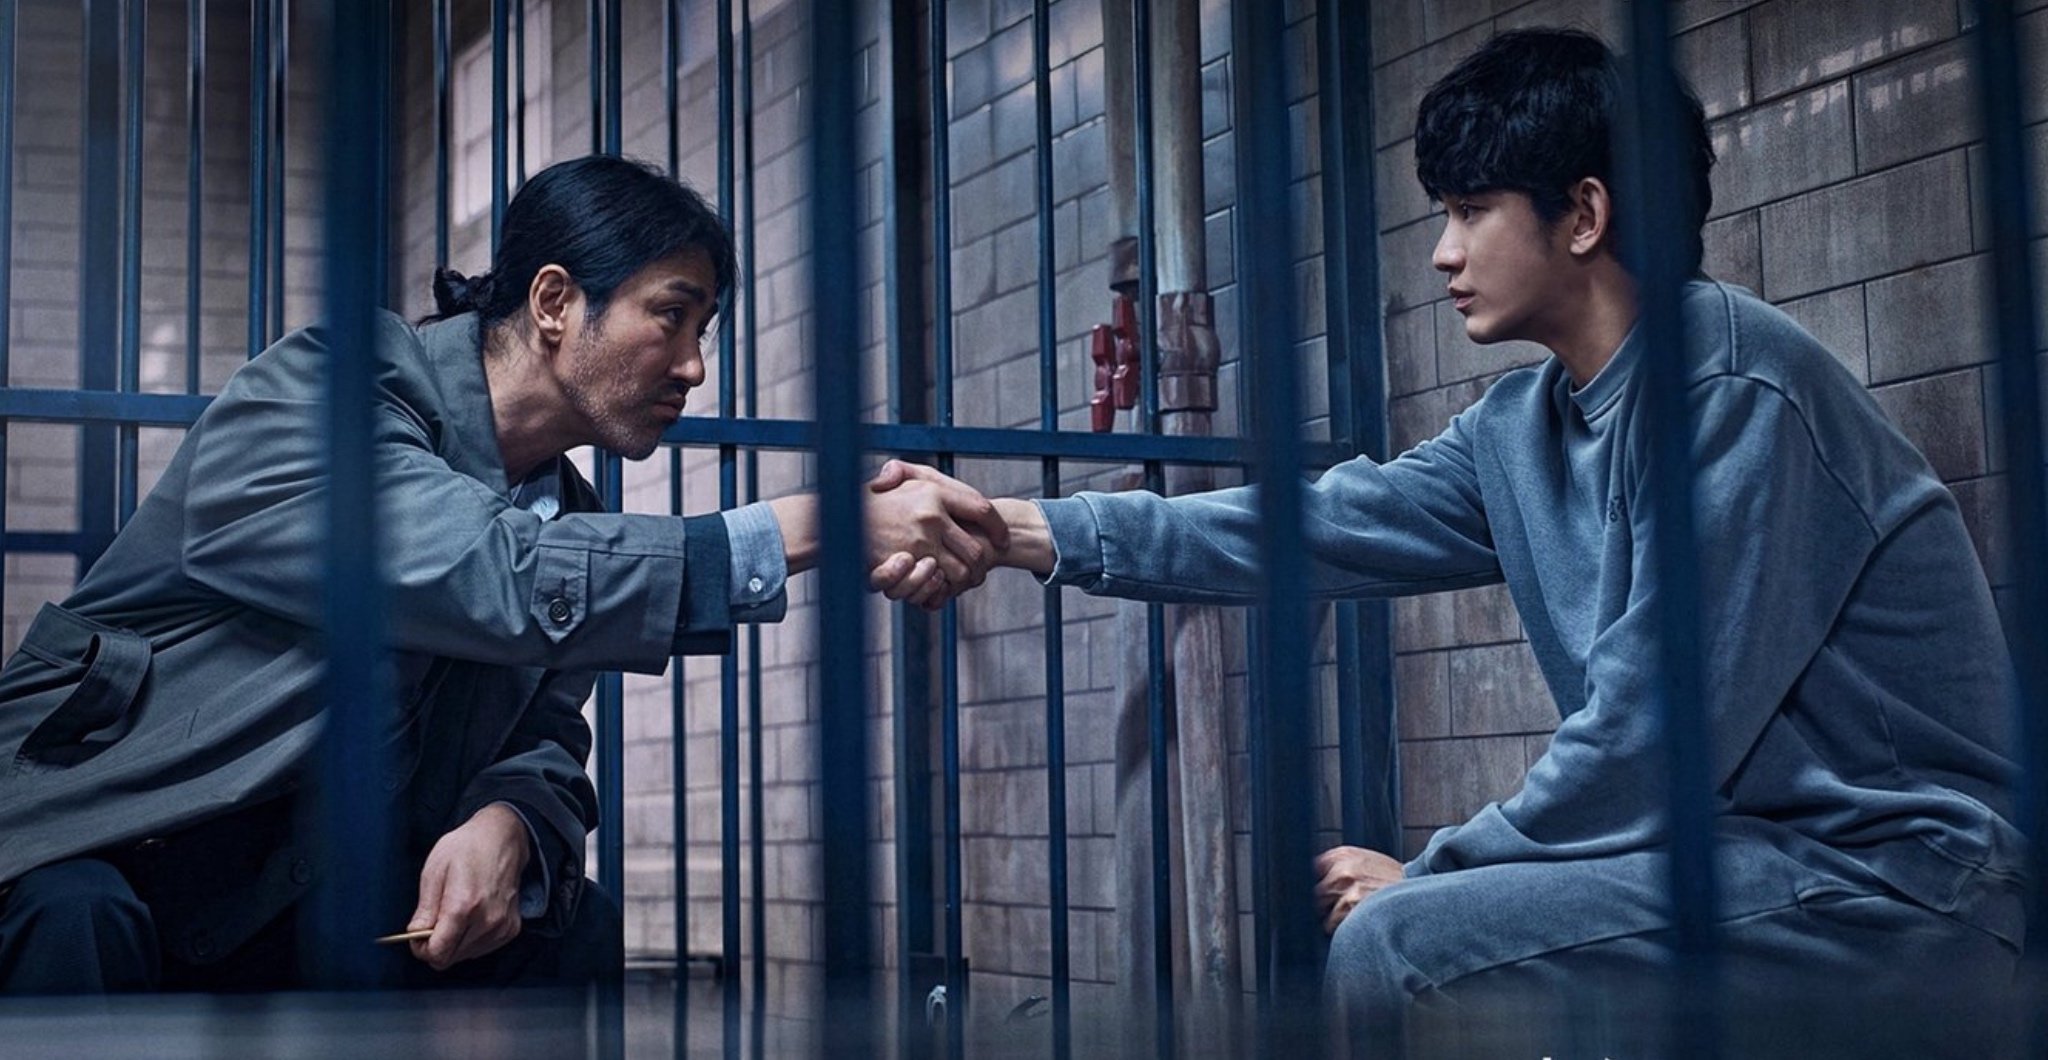 Actors Cha Seung-Won and Kim Too-Hyun for 'One Ordinary Day' K-drama shaking hands in jail cell